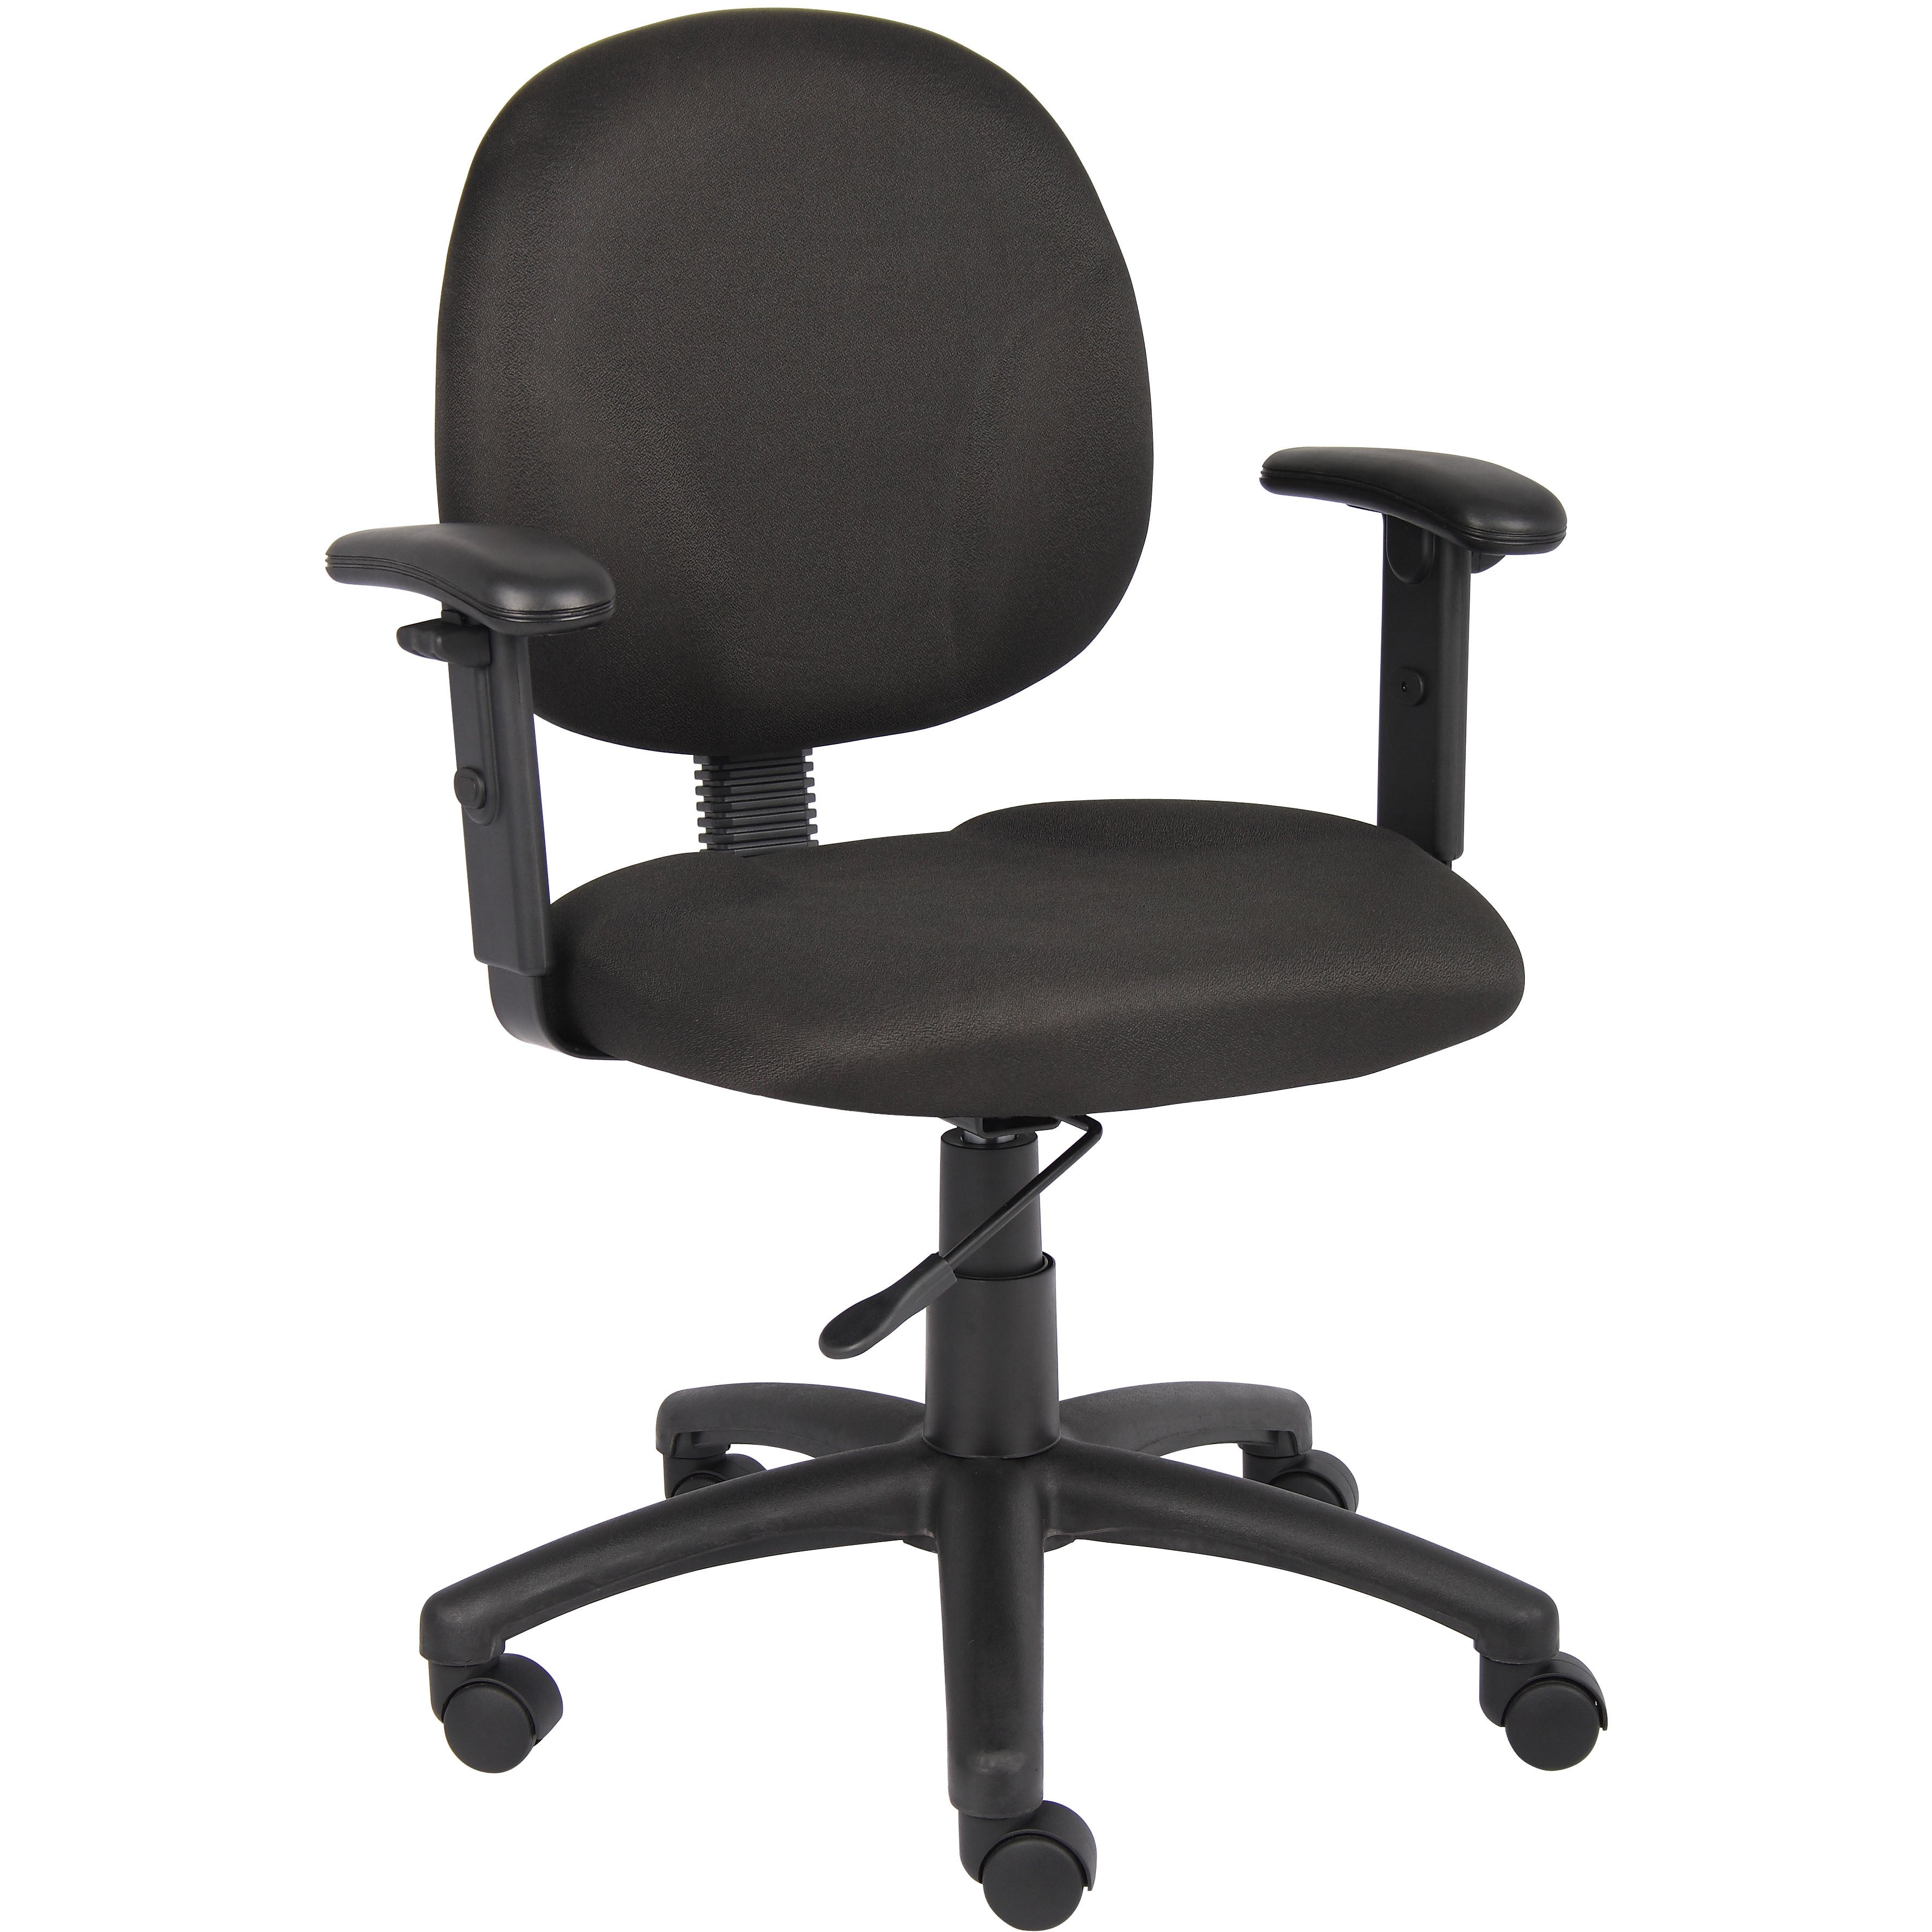 Diamond Task Chair In Black with Adjustable Arms, B9091-BK